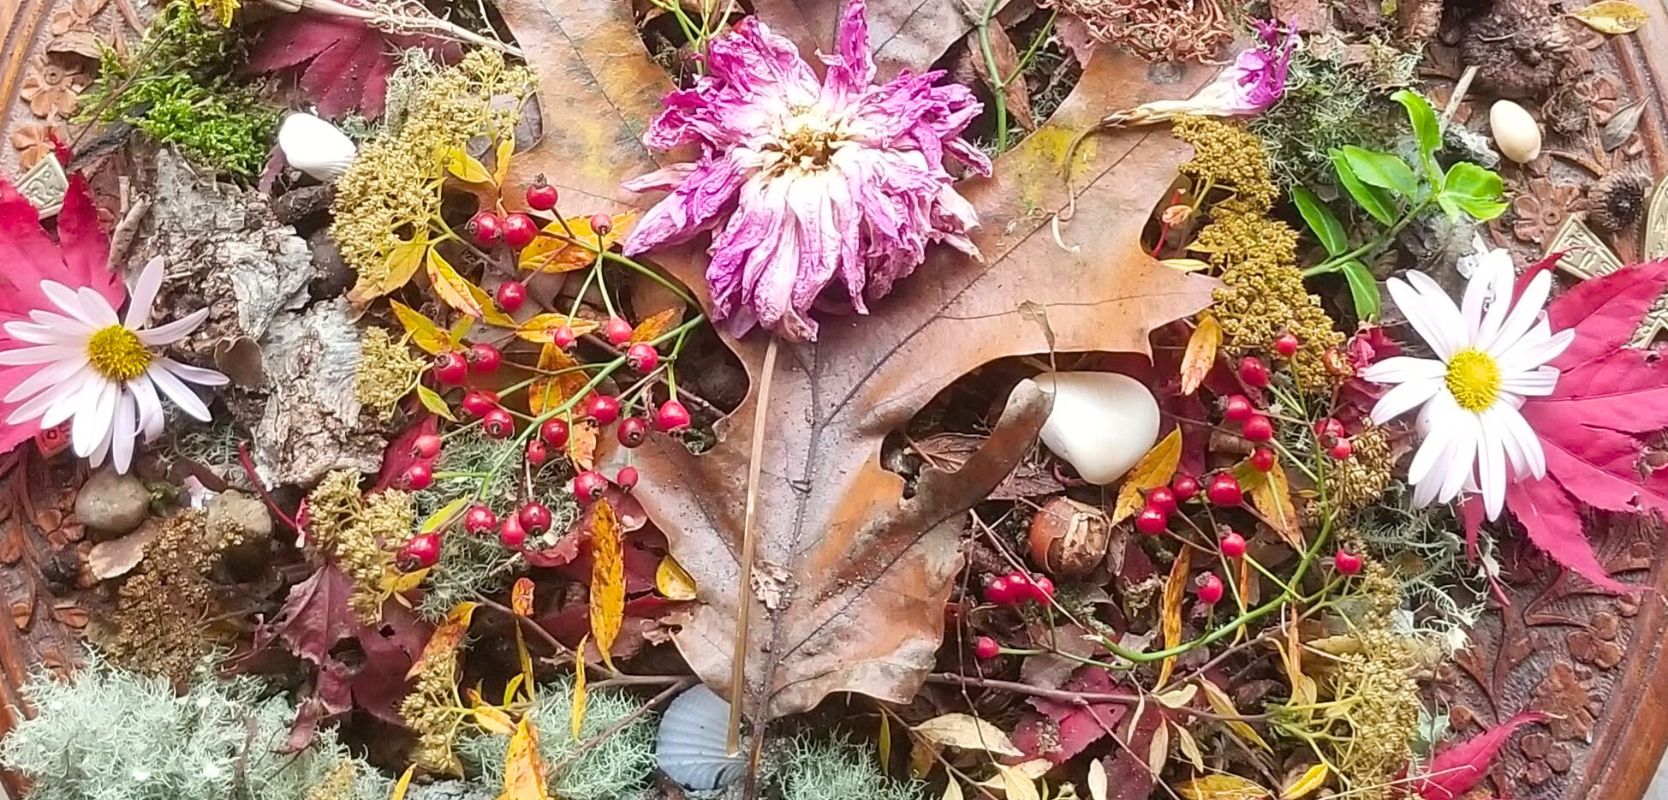 Featured image for “Autumn altar”